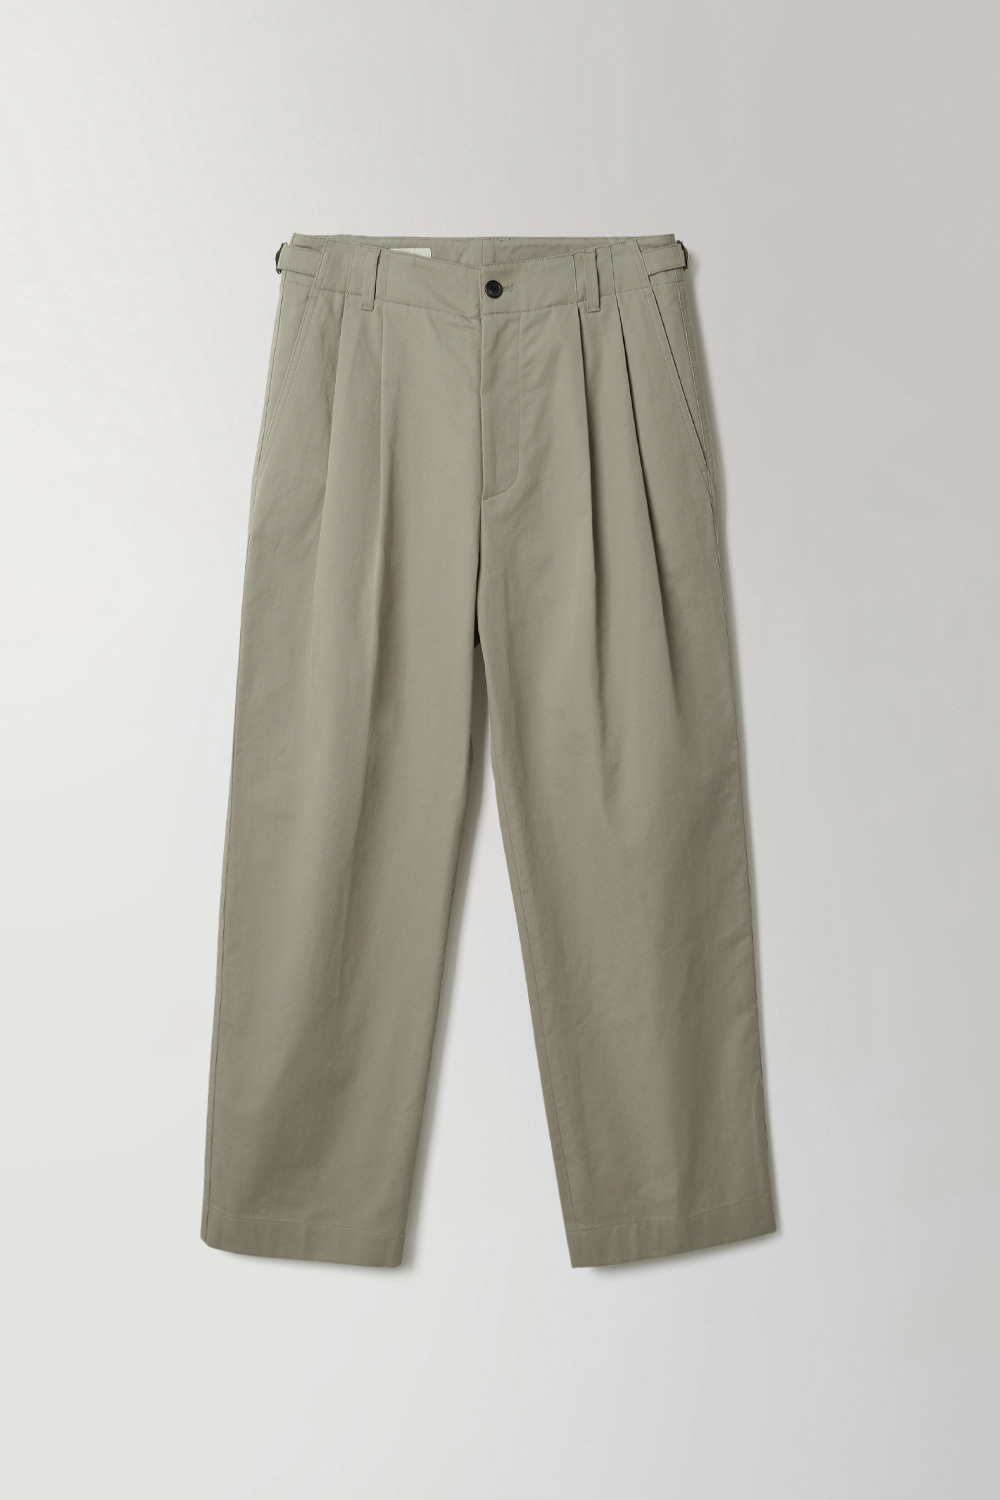 TRAVELLER CHINO PANTS (TYPE1) - OLIVE GREY